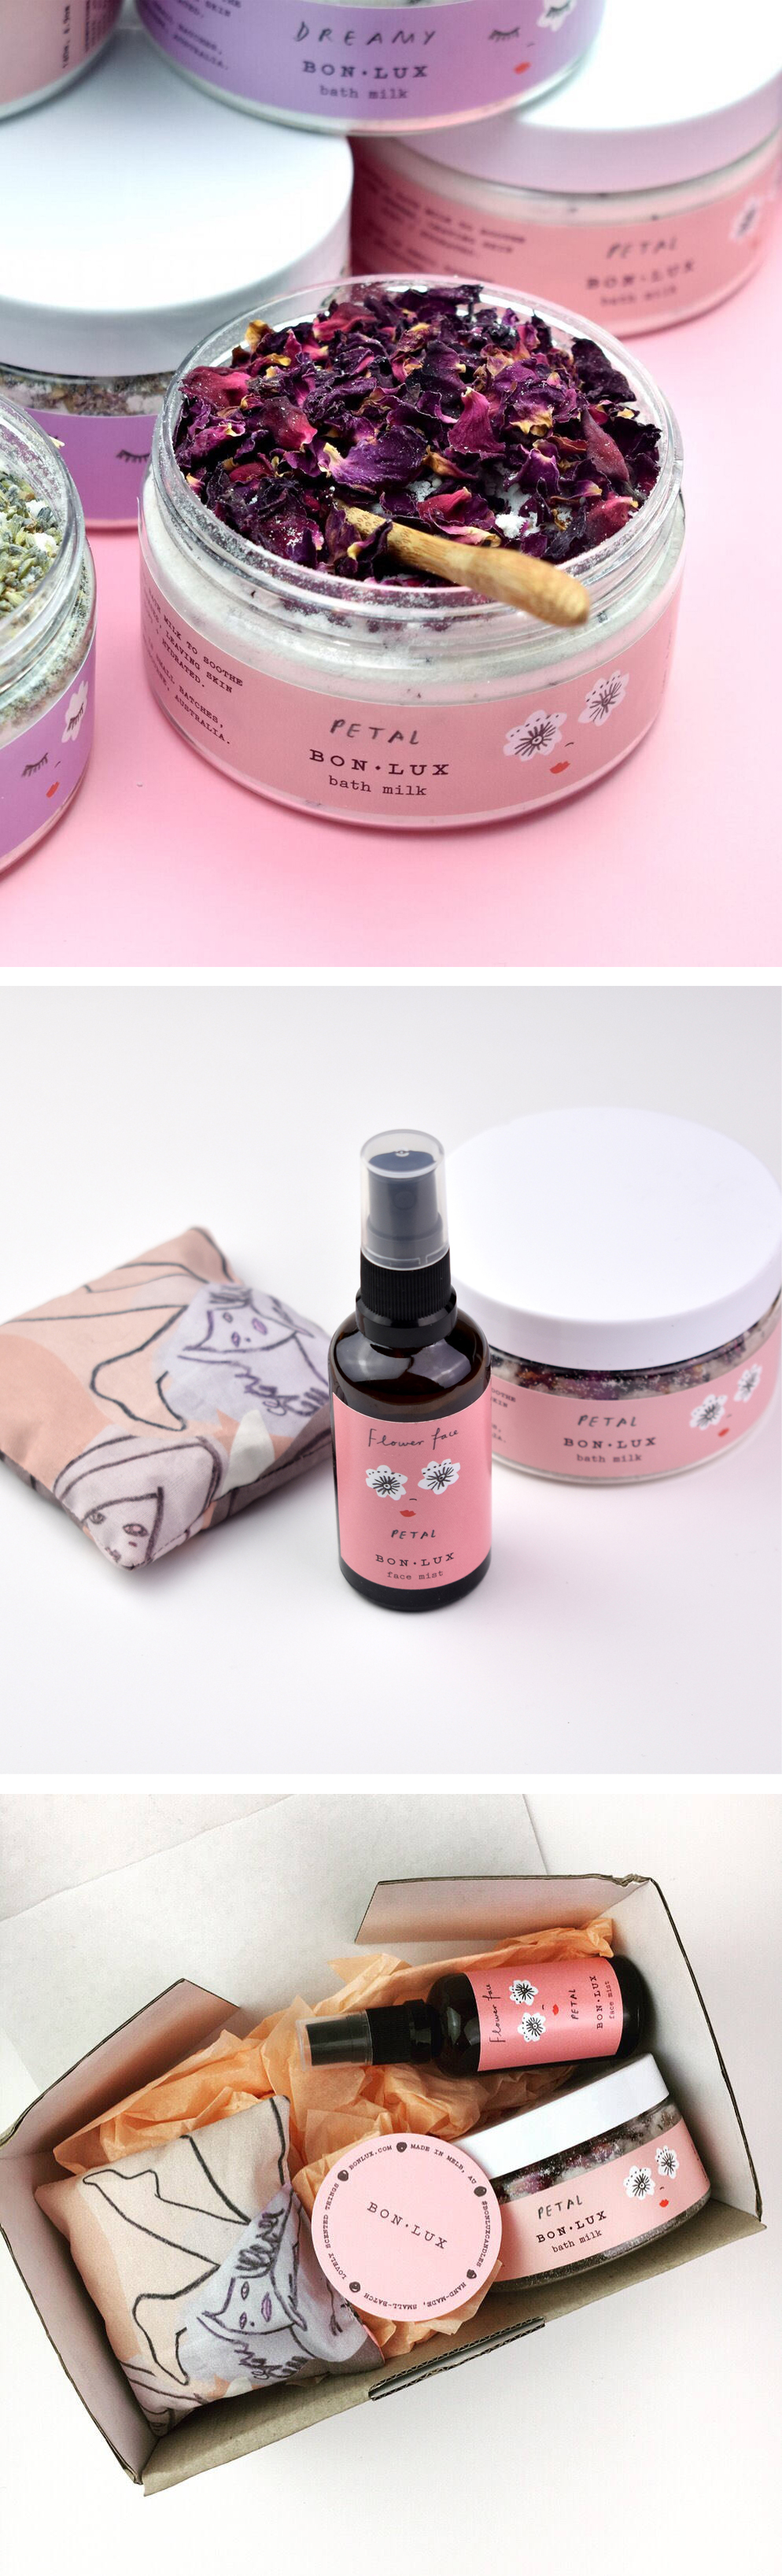 Mother’s Day Petal gift box of rose & geranium scented natural bath + beauty products |Bon Lux on Etsy